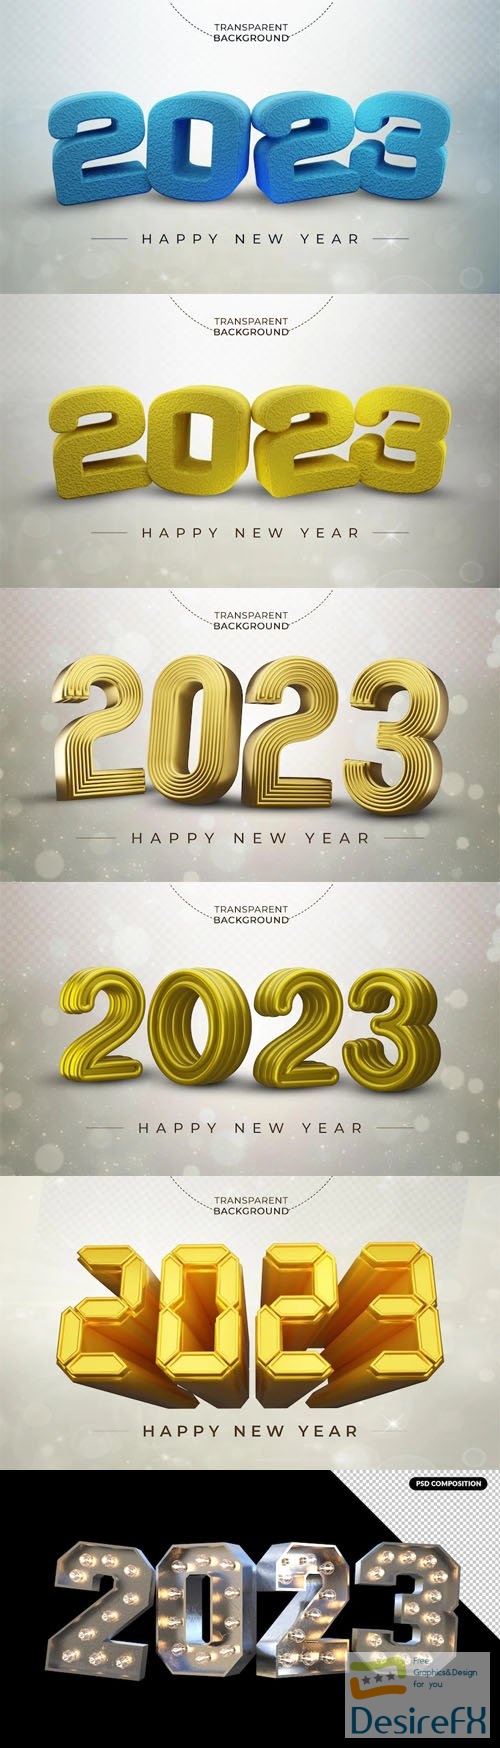 2023 Happy New Year - 3D Rendering PSD Templates